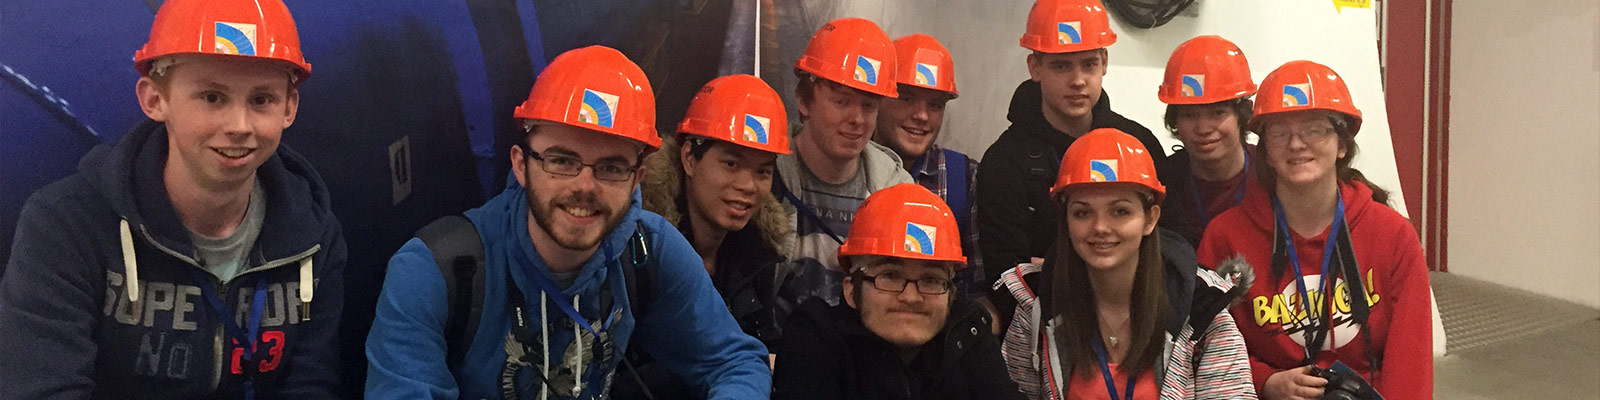 Students at the CERN facility